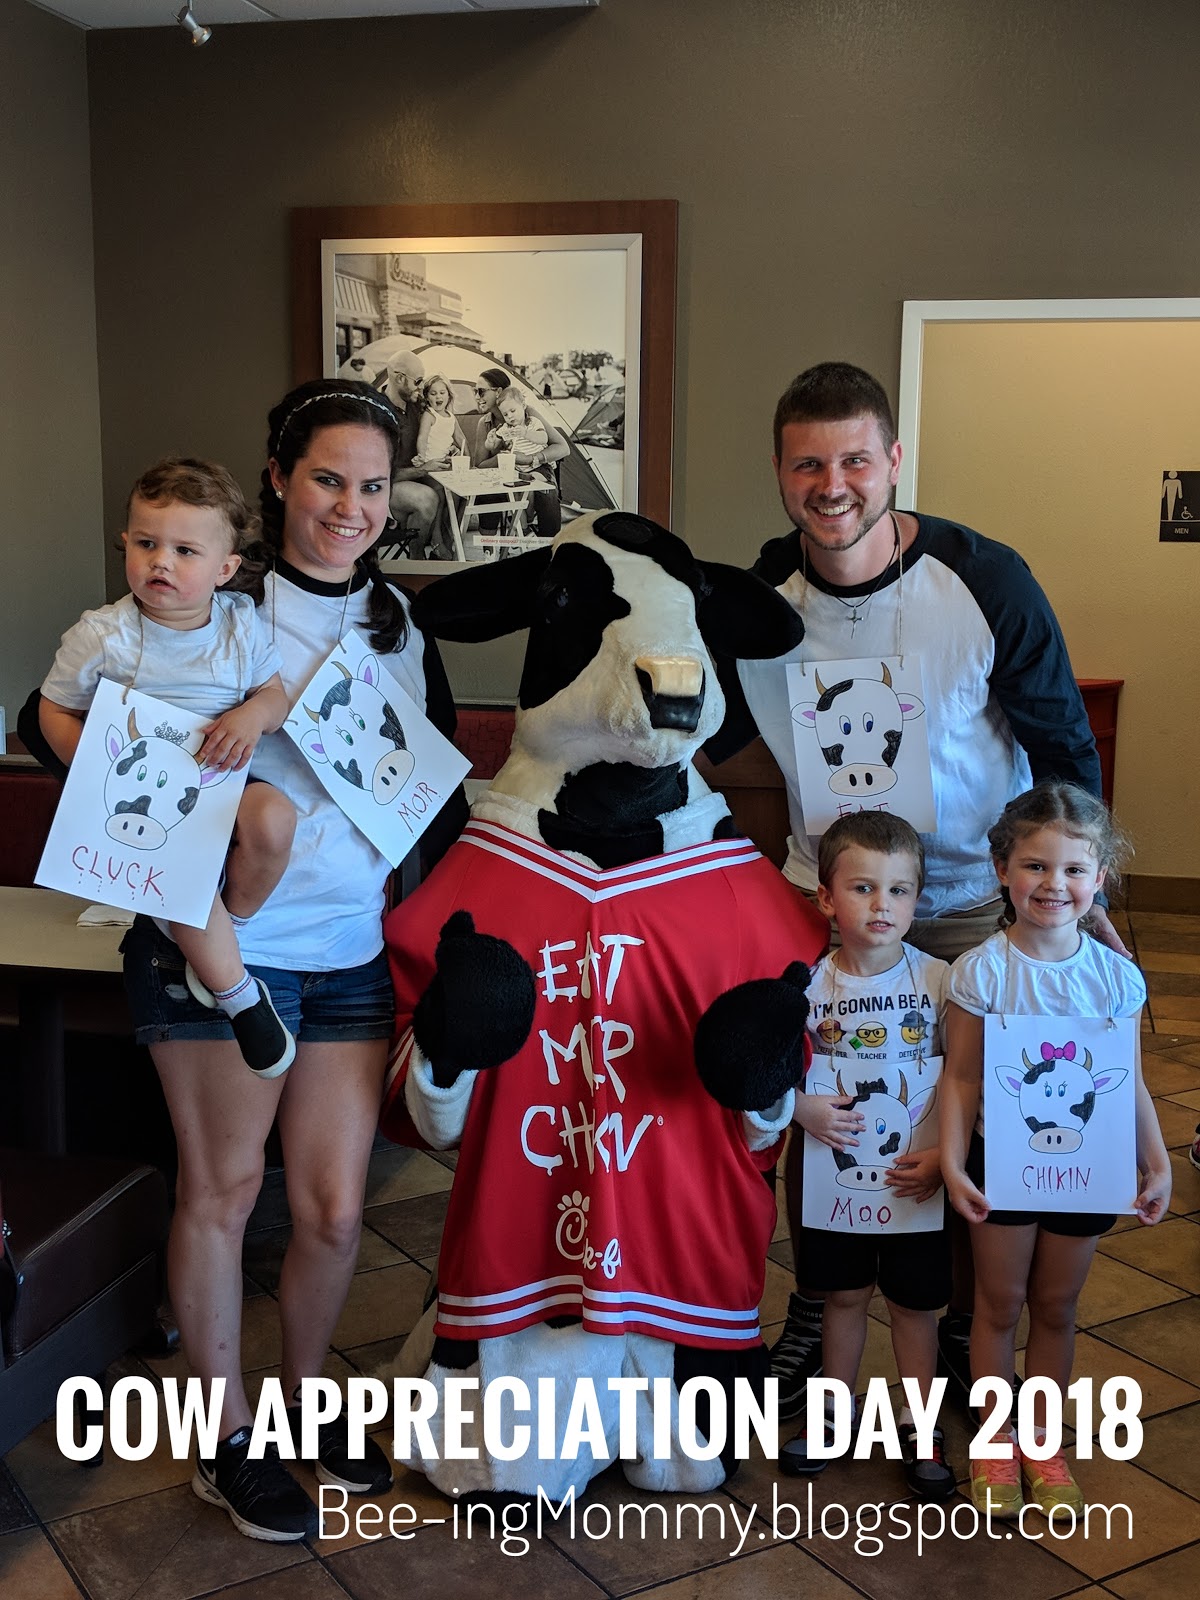 free-chick-fil-a-cow-appreciation-day-costumes-for-the-whole-family